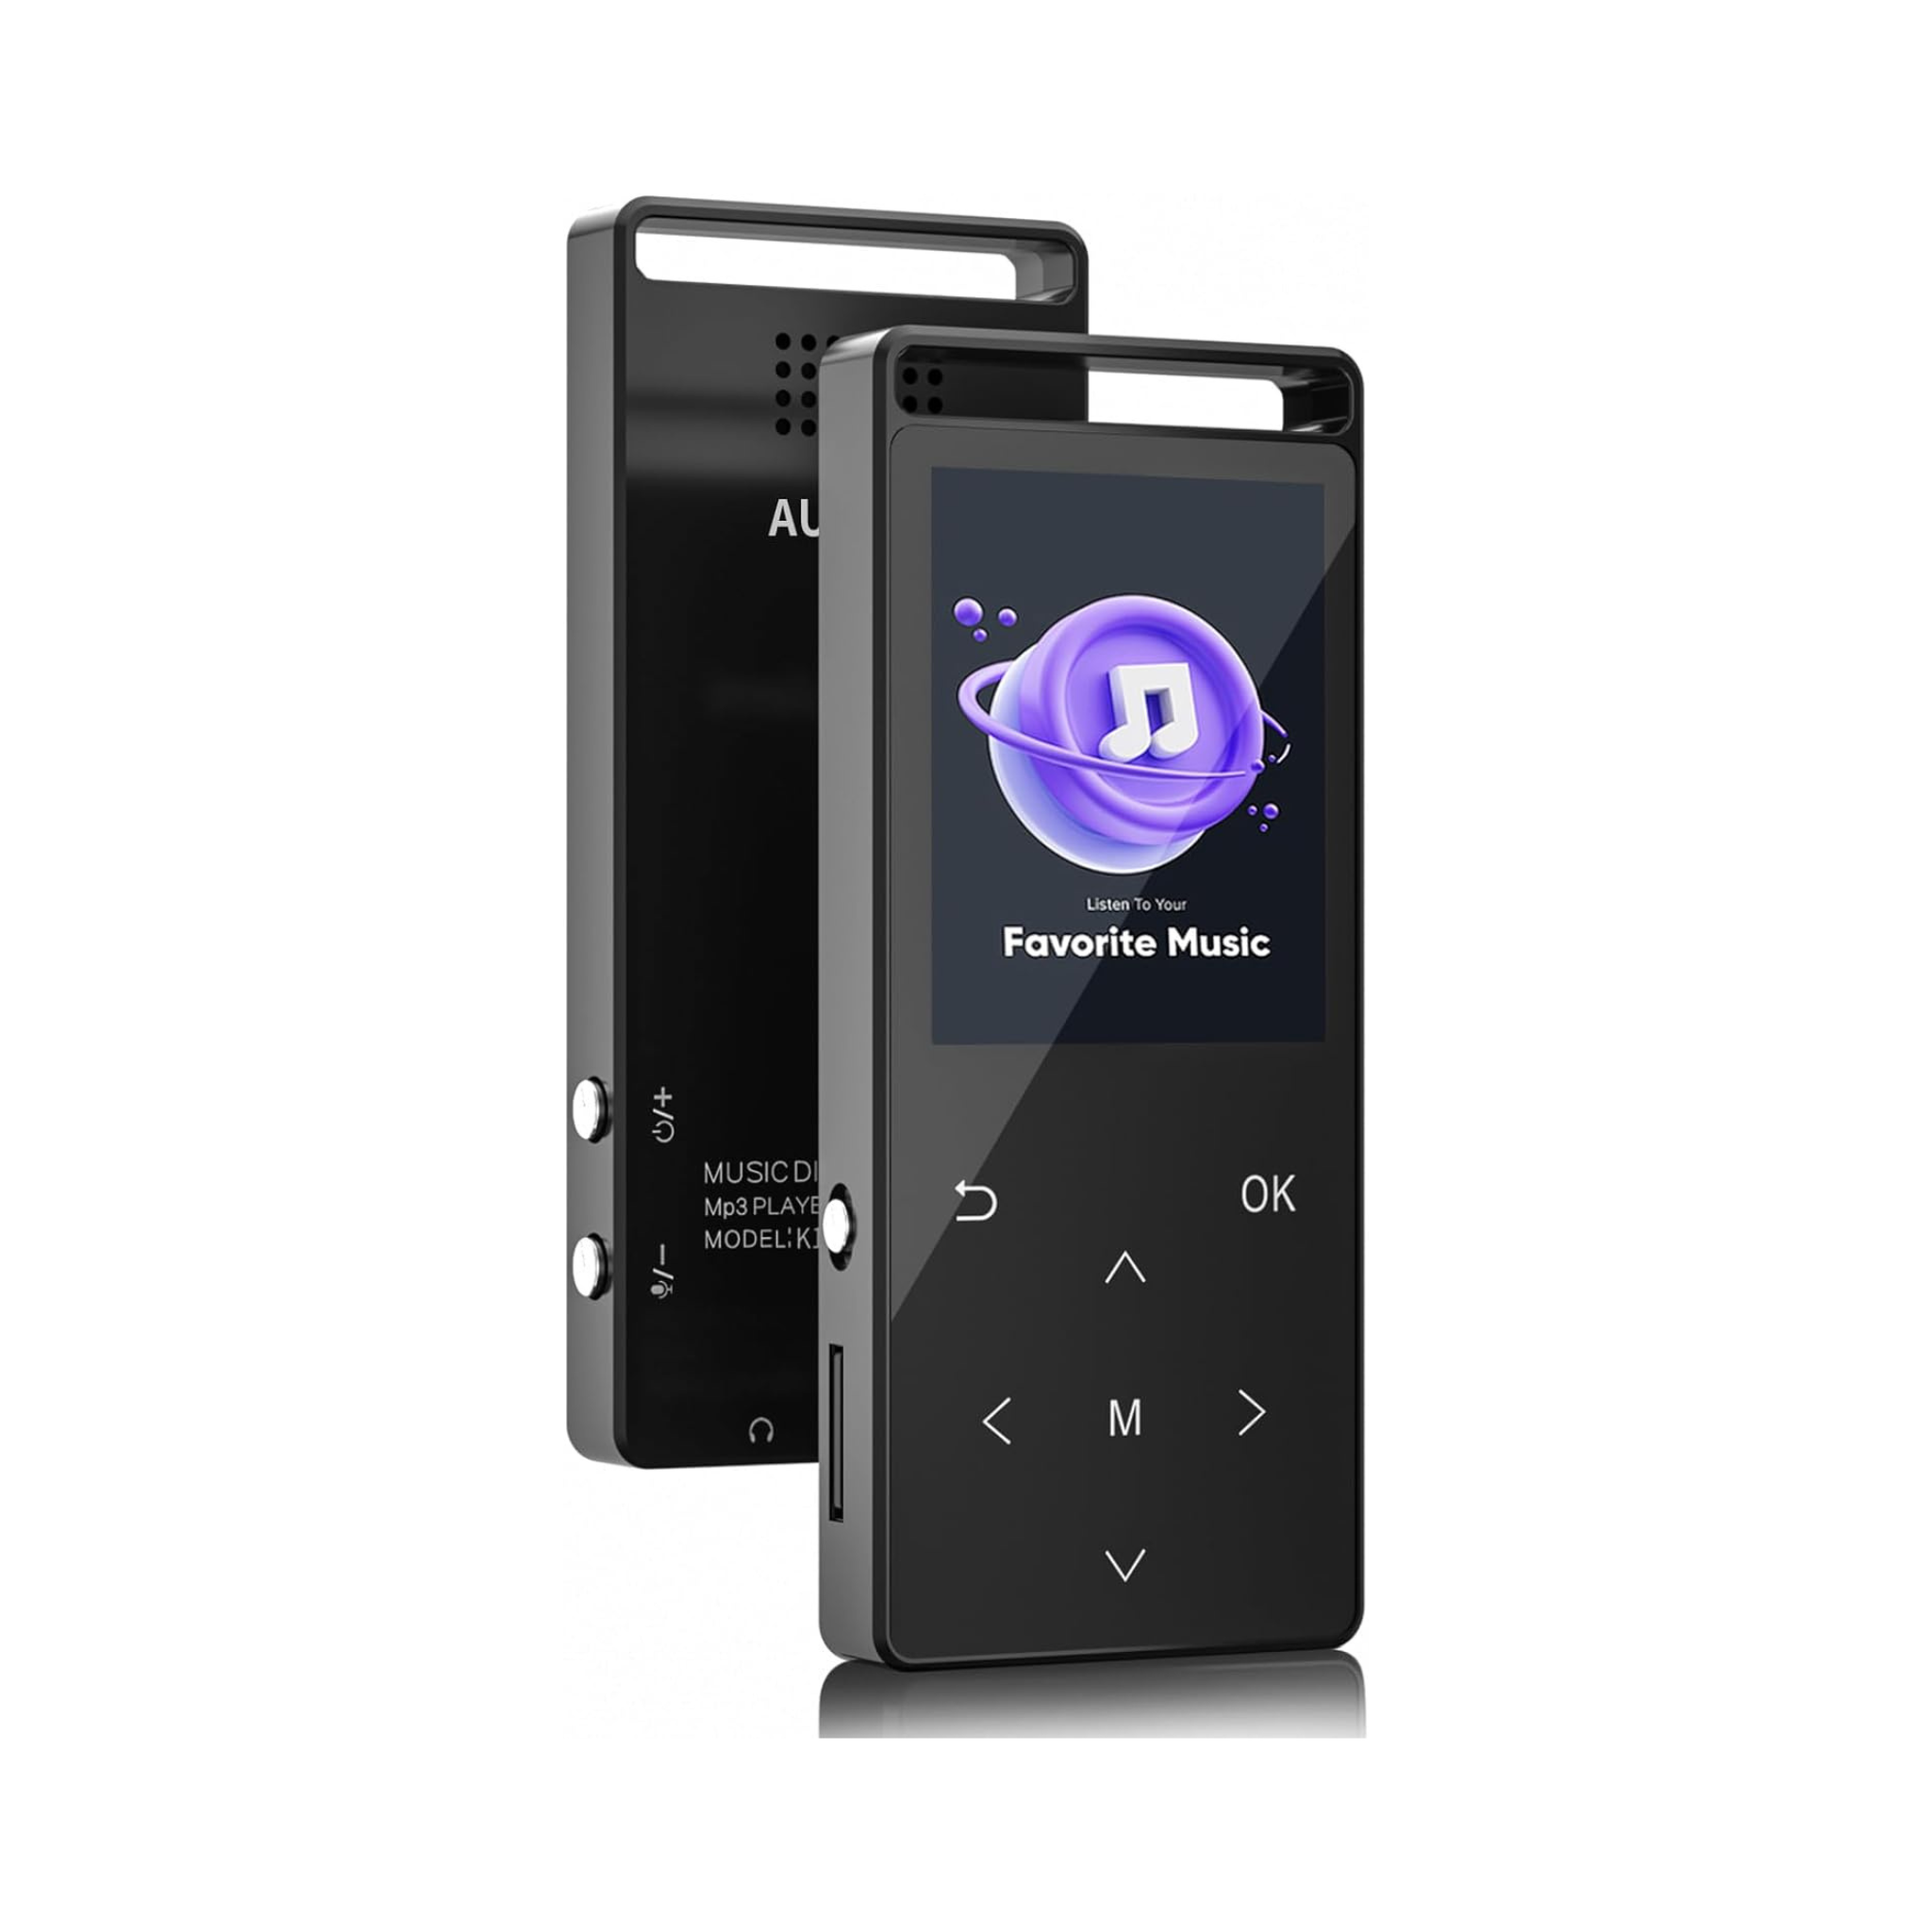 Auoking 128GB MP3 Player With Bluetooth & Speaker